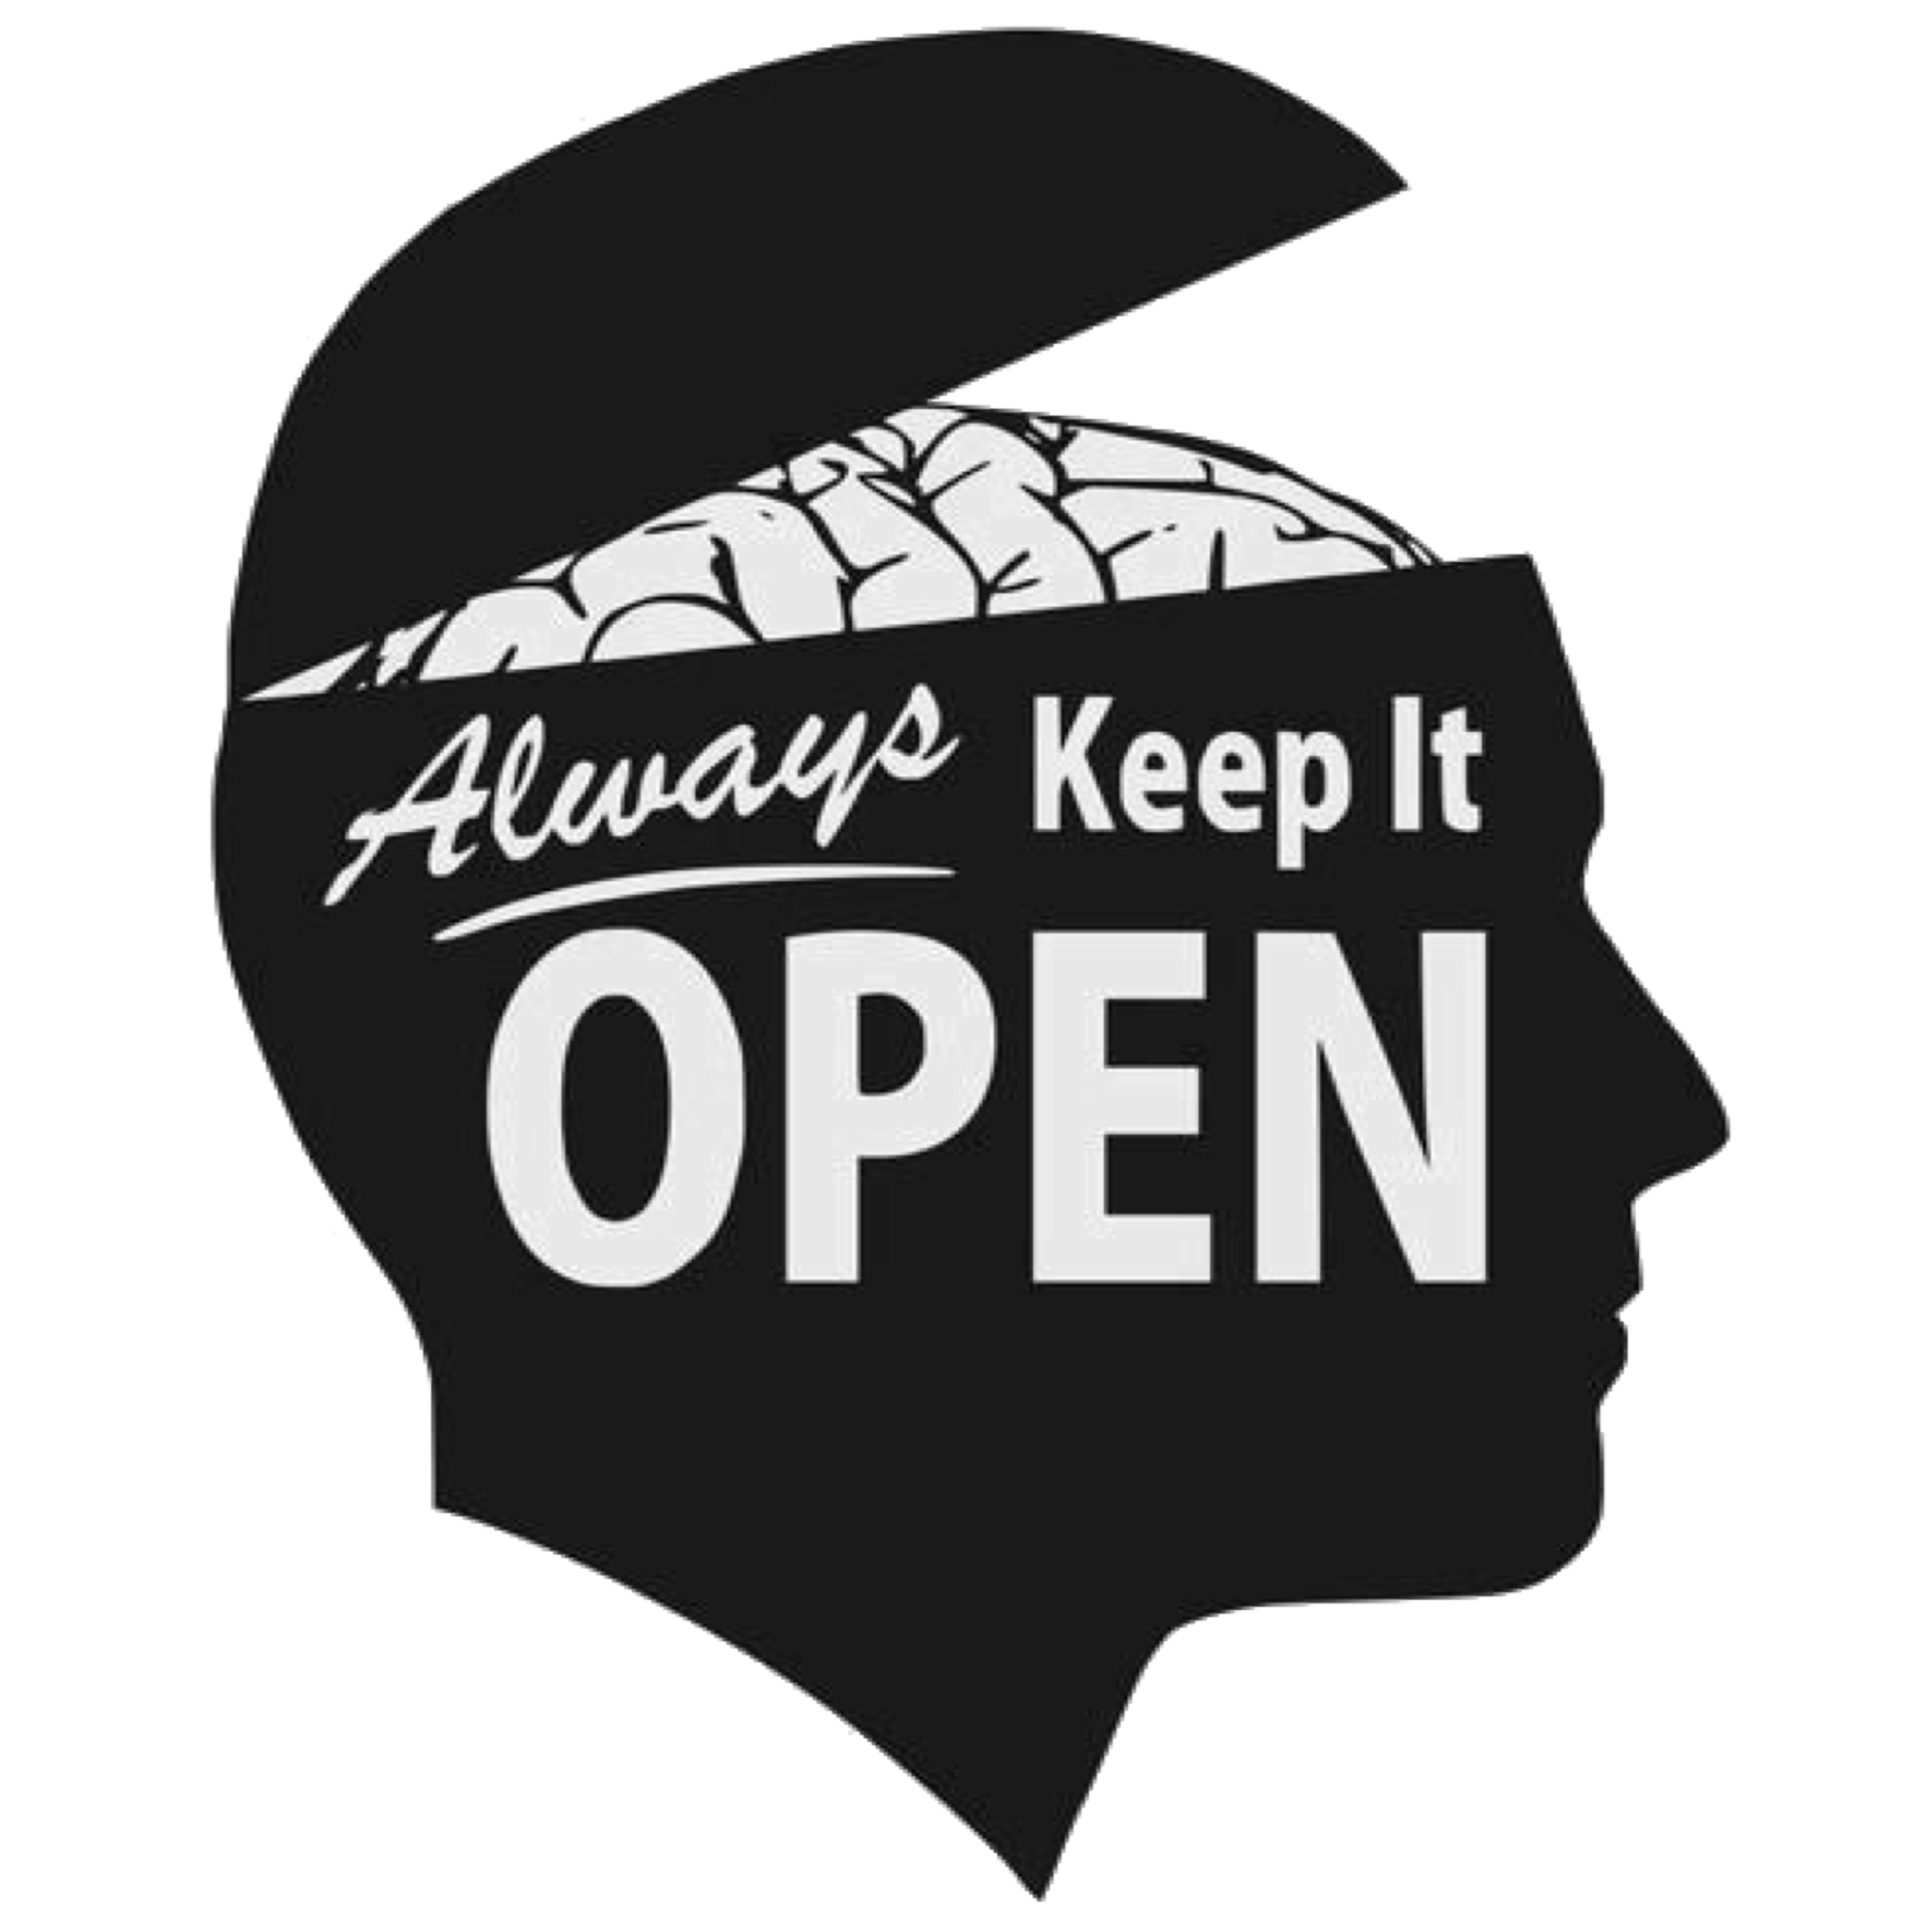 Open Mind. Open minded. Keep an open Mind. Open-minded person. Always keep the best